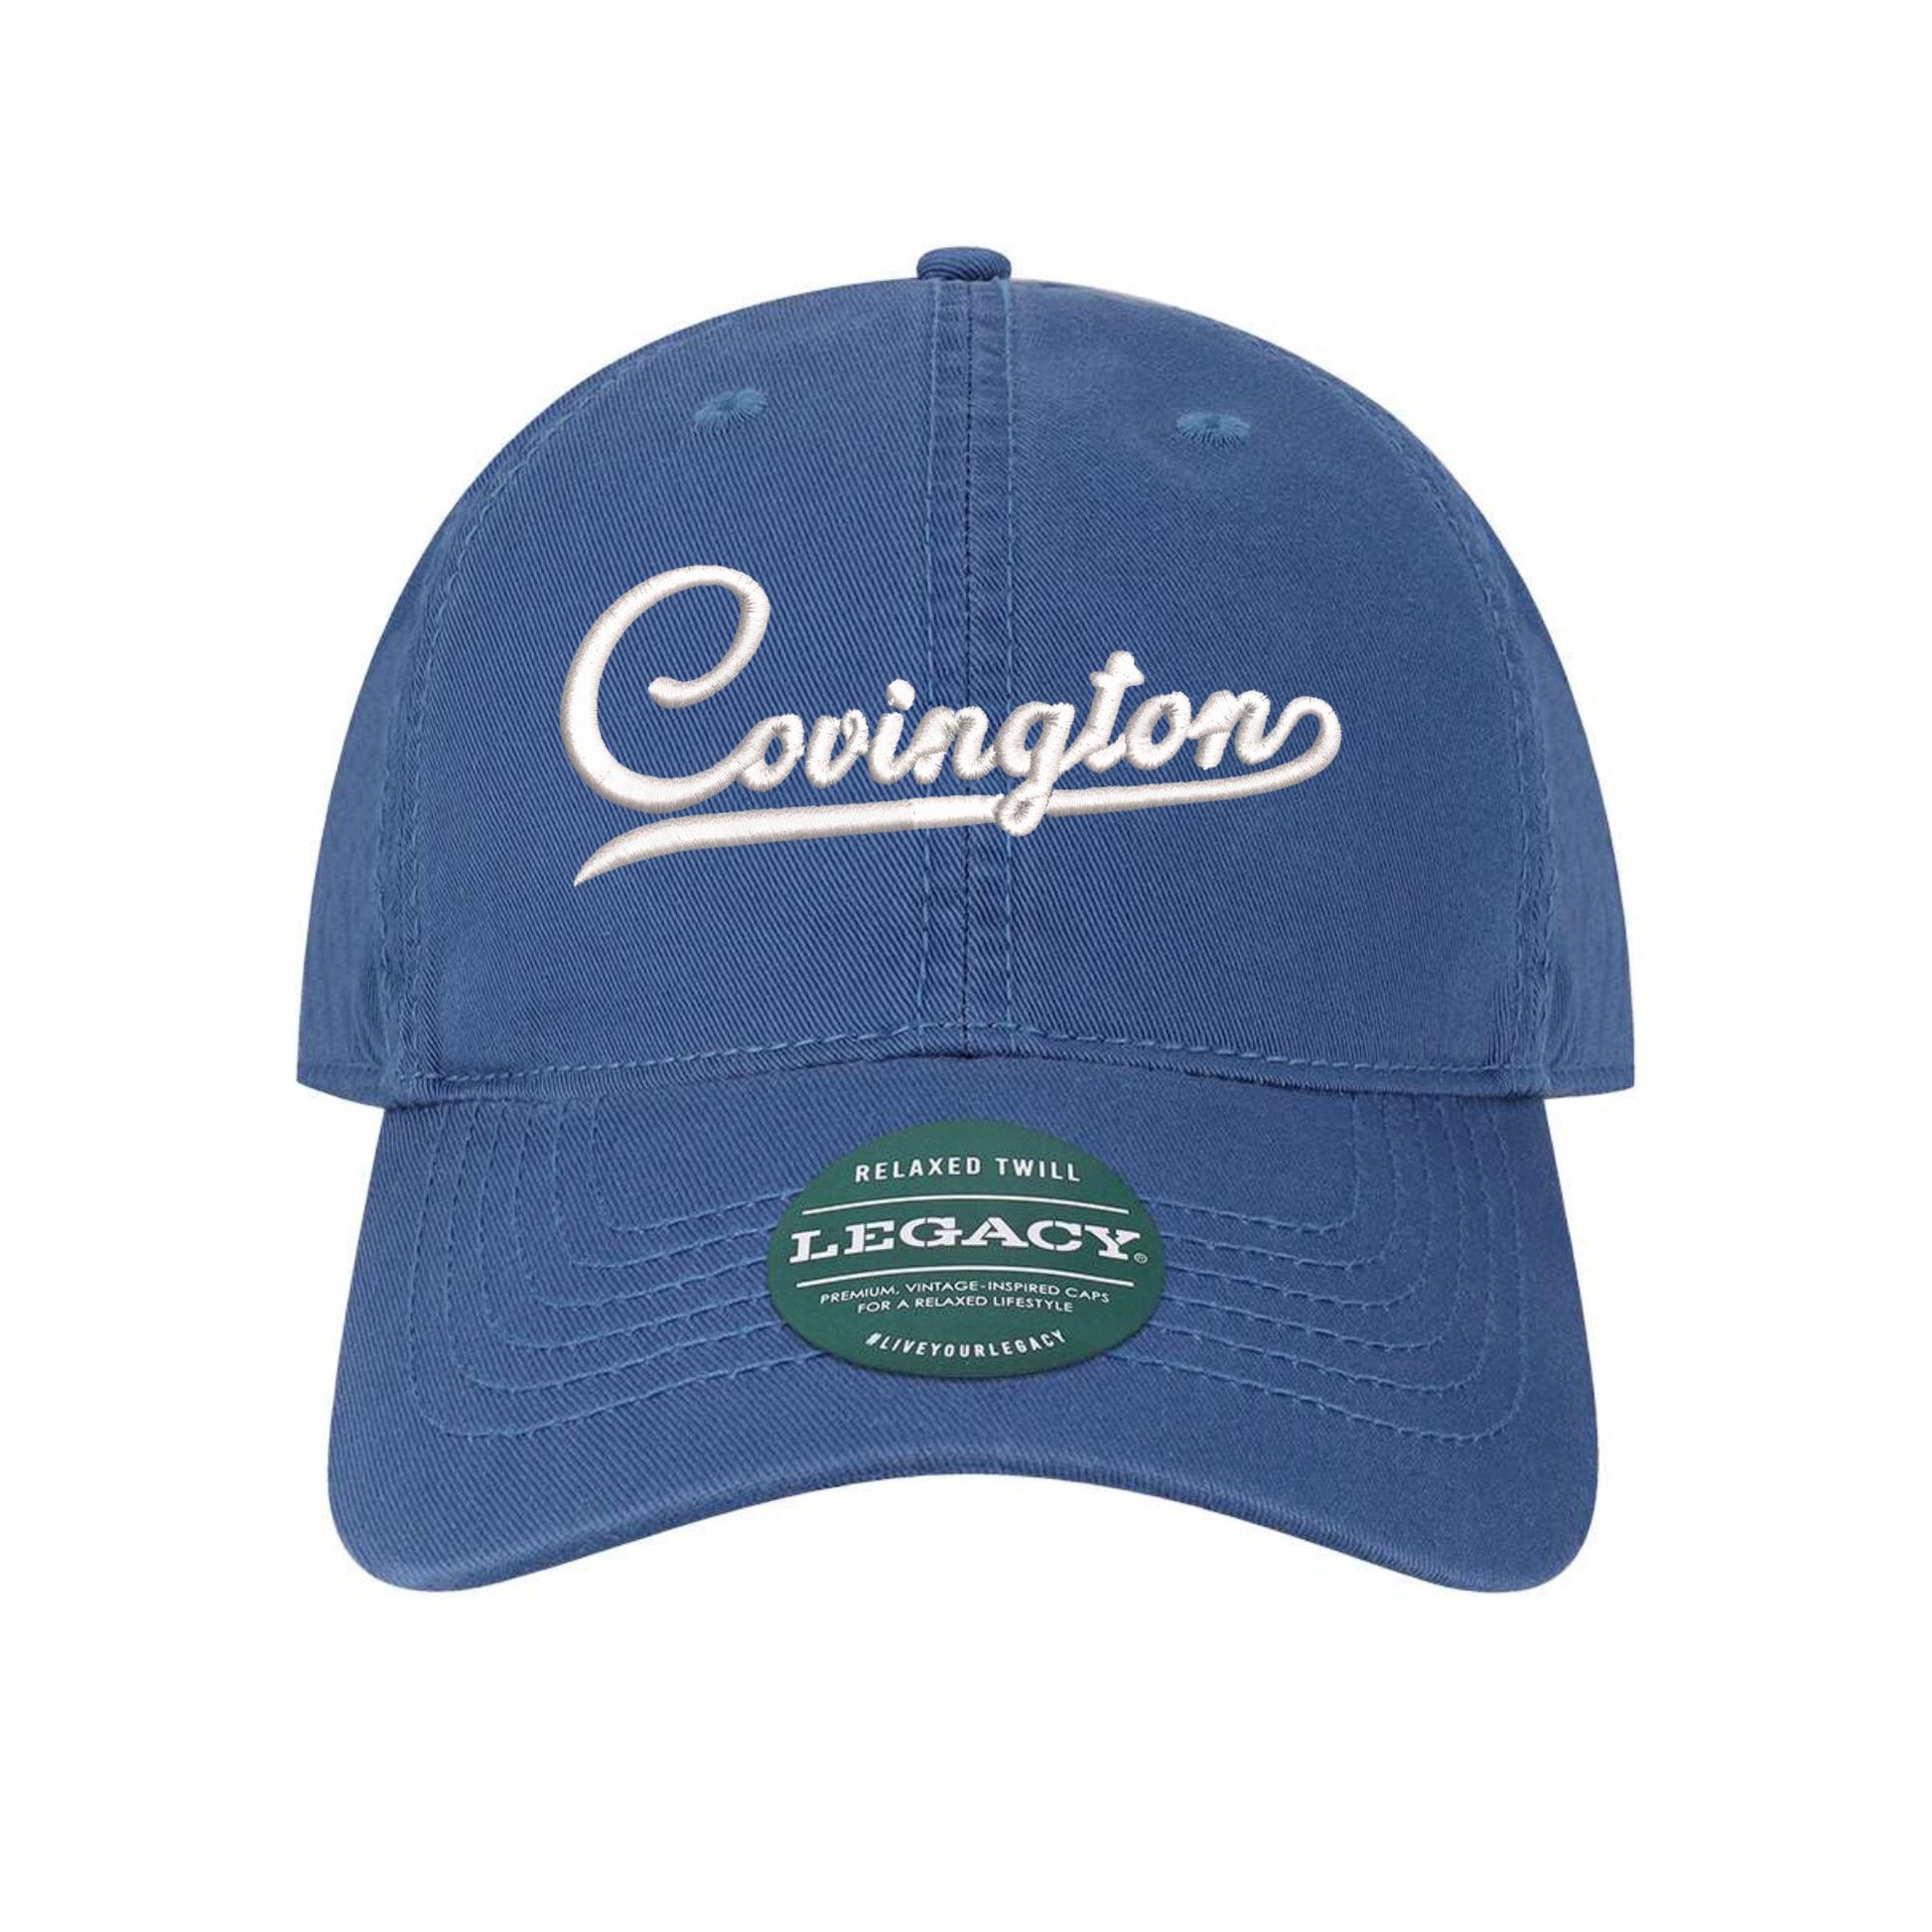 Royal Blue Embroidered baseball hat with Covington design in white thread